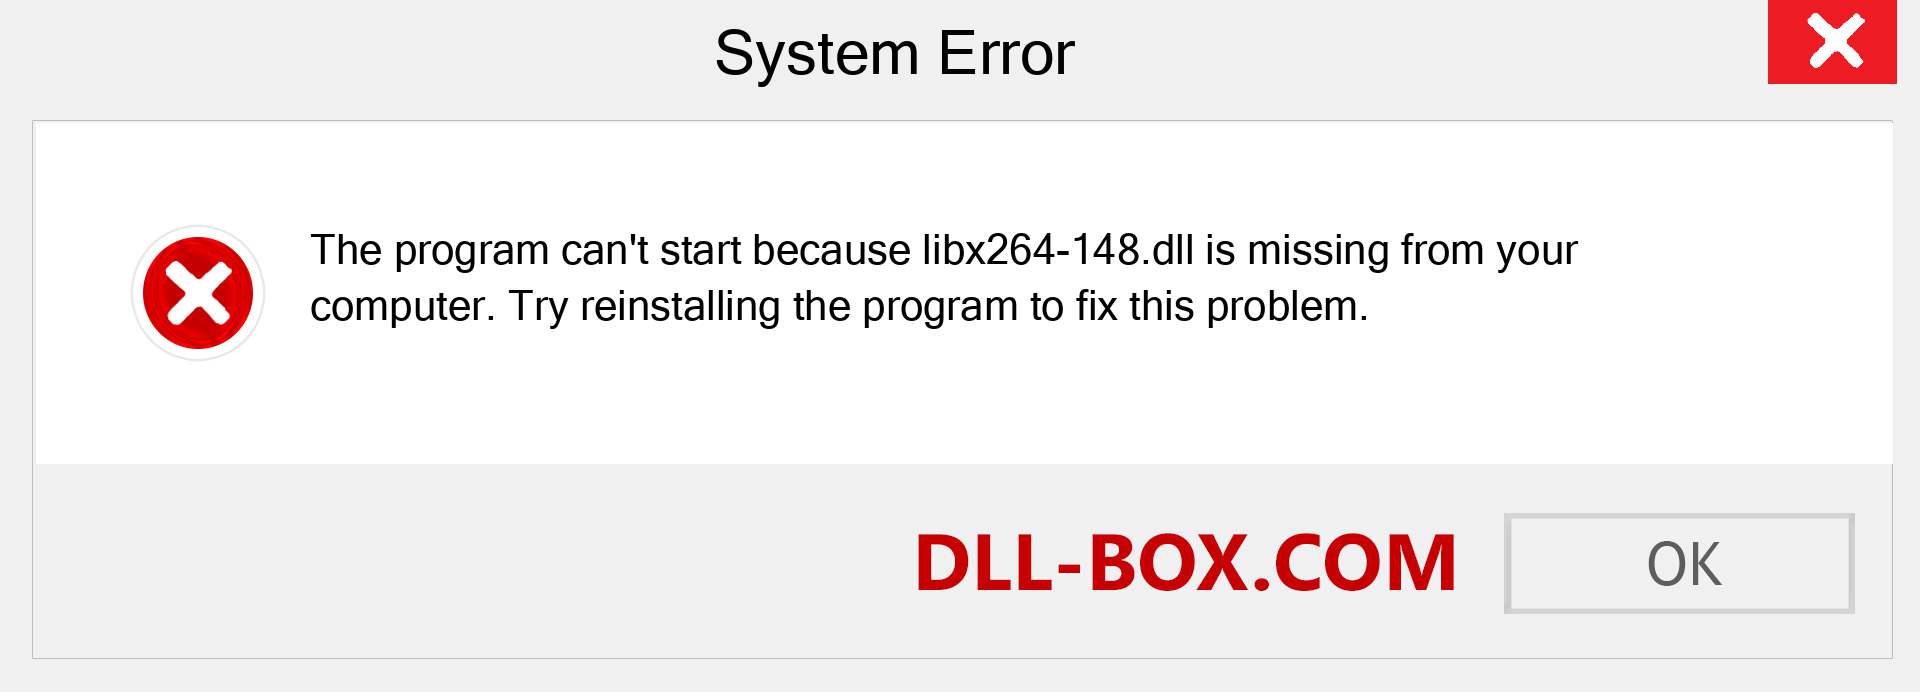  libx264-148.dll file is missing?. Download for Windows 7, 8, 10 - Fix  libx264-148 dll Missing Error on Windows, photos, images